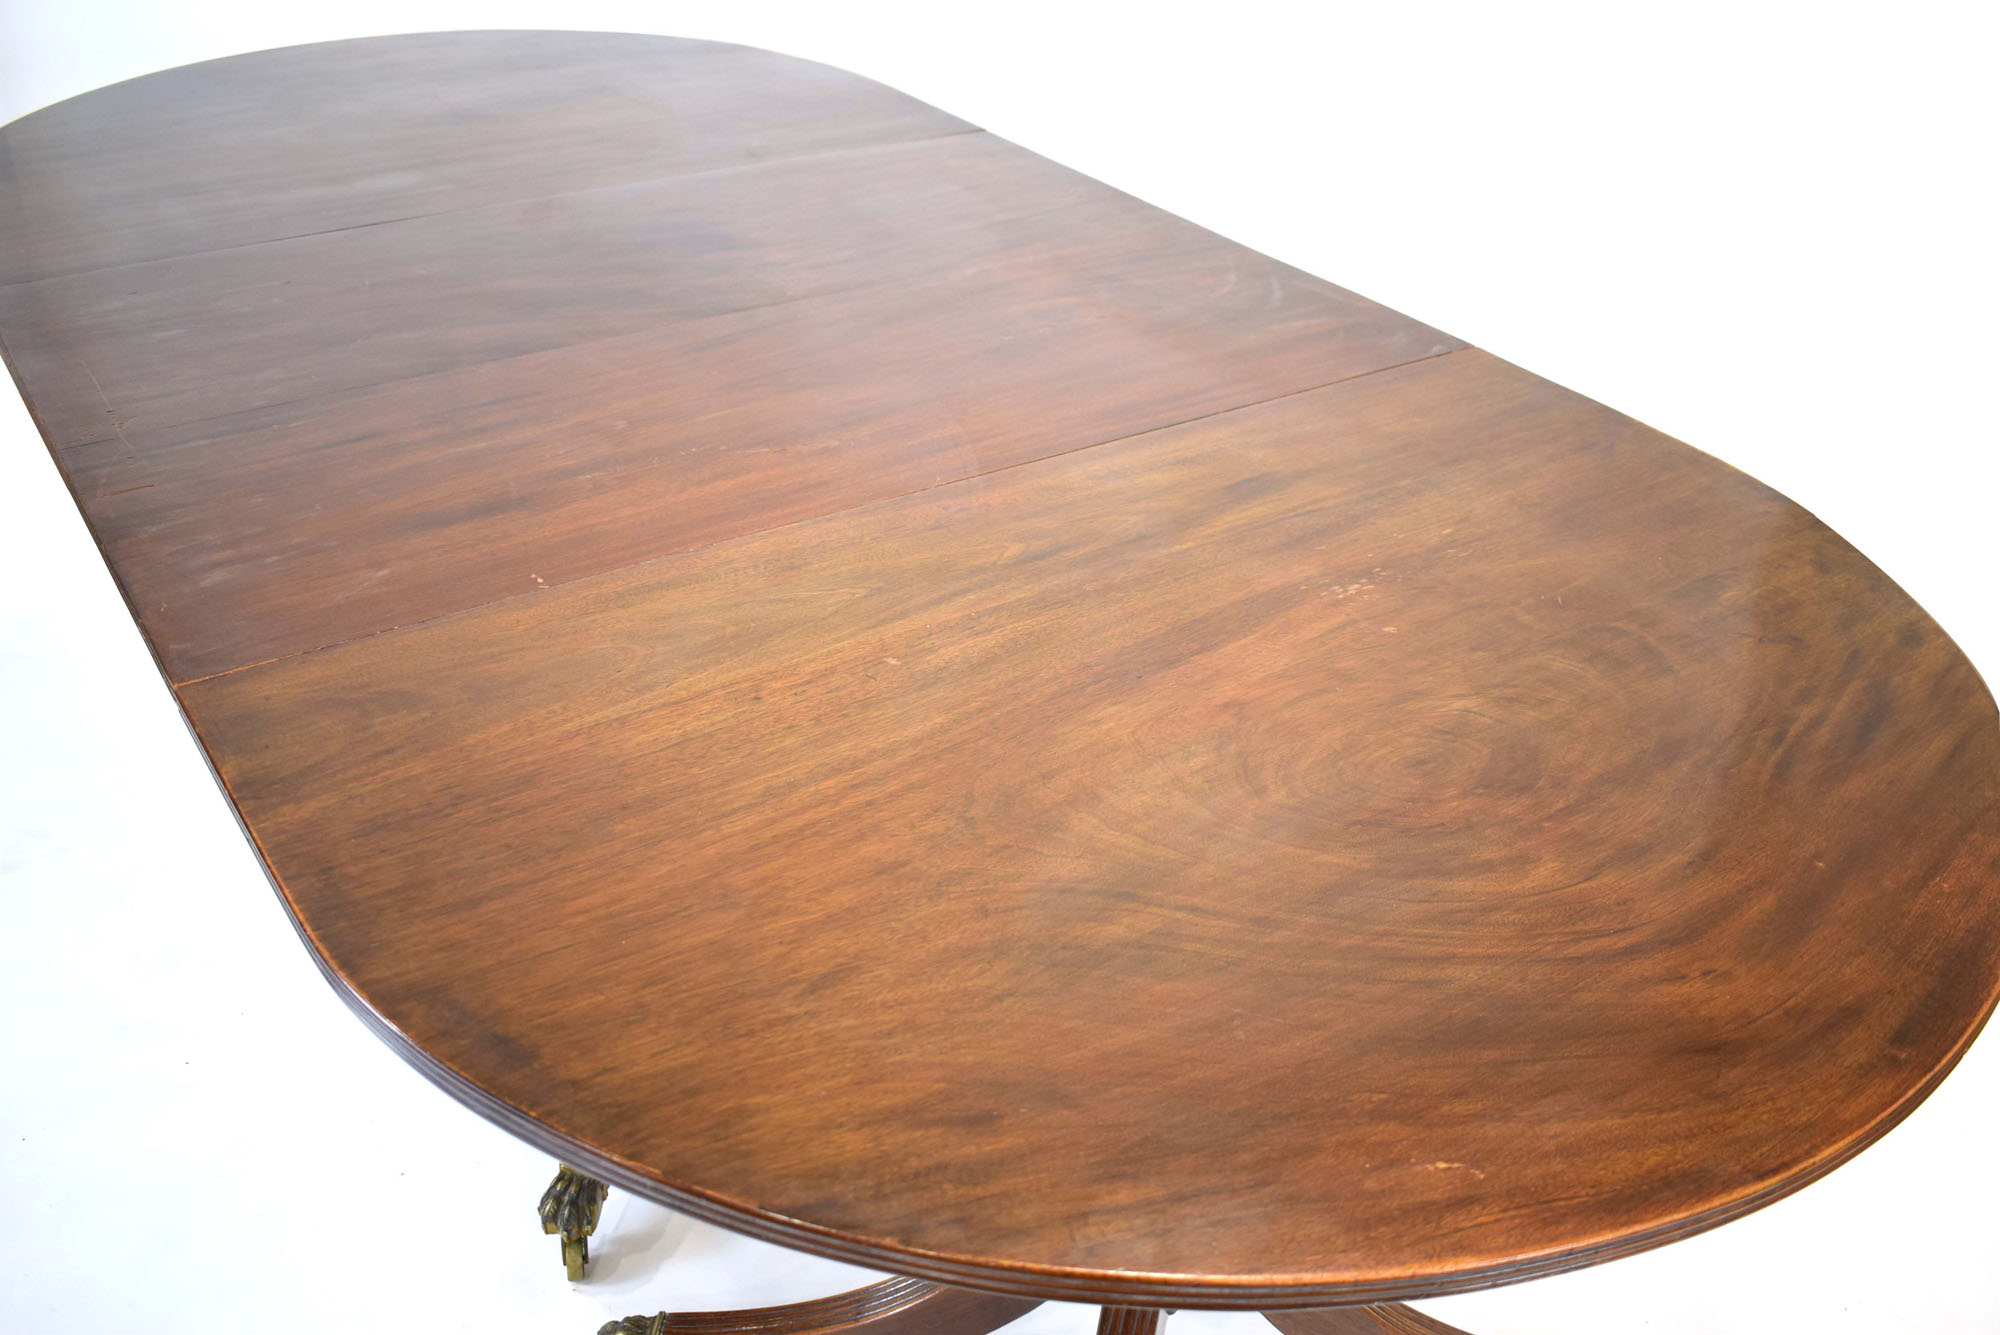 An early 20th century mahogany oval dining table on three columnar pedestals with reeded legs and - Image 3 of 12